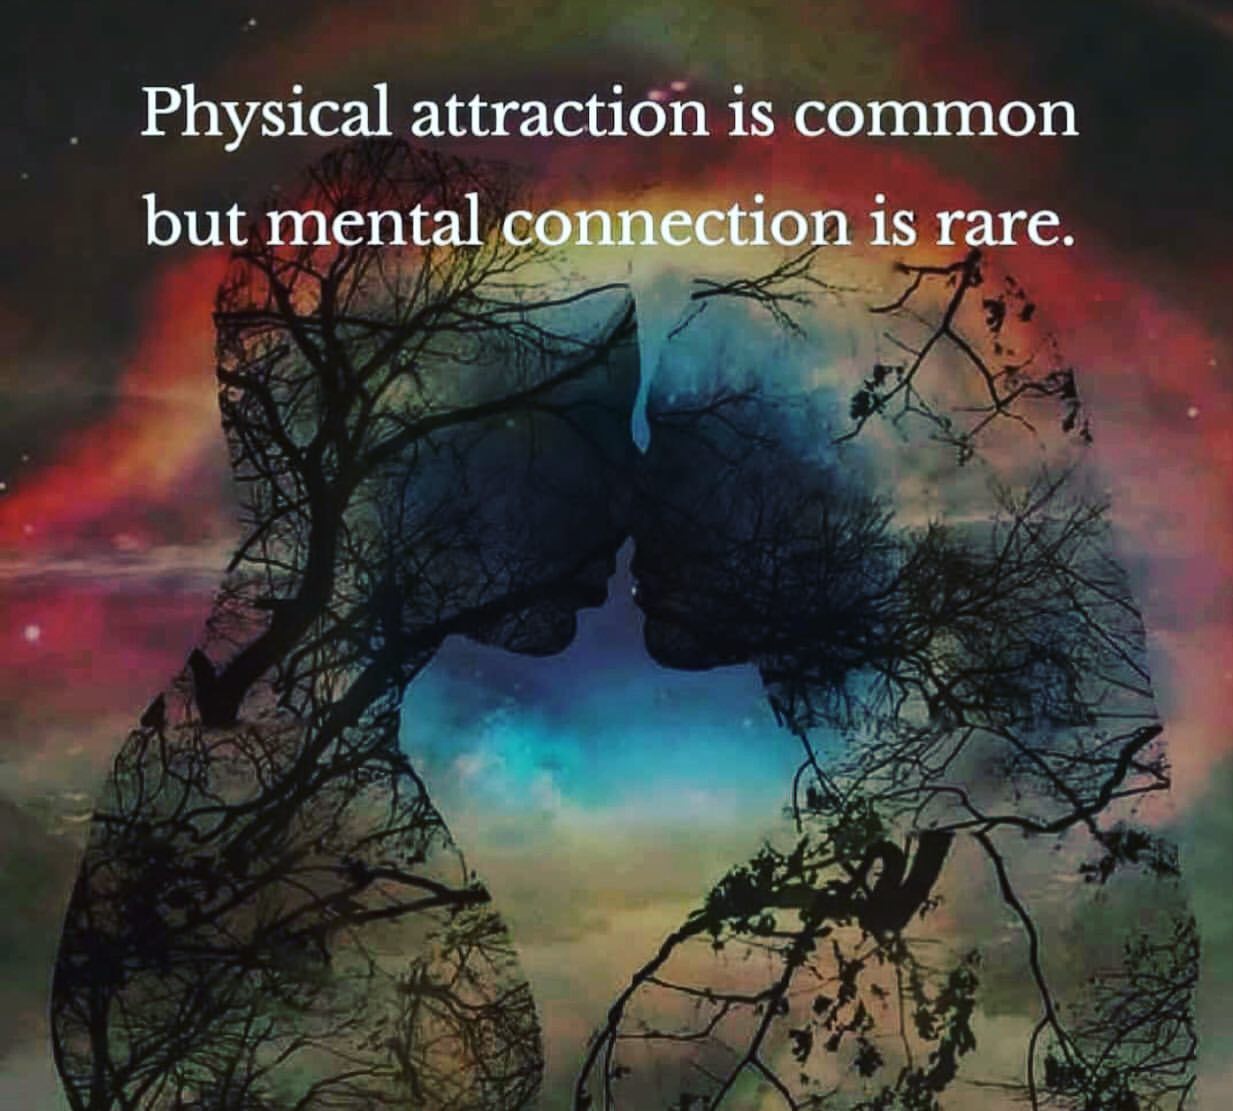 Physical attraction is common but mental connection is rare.